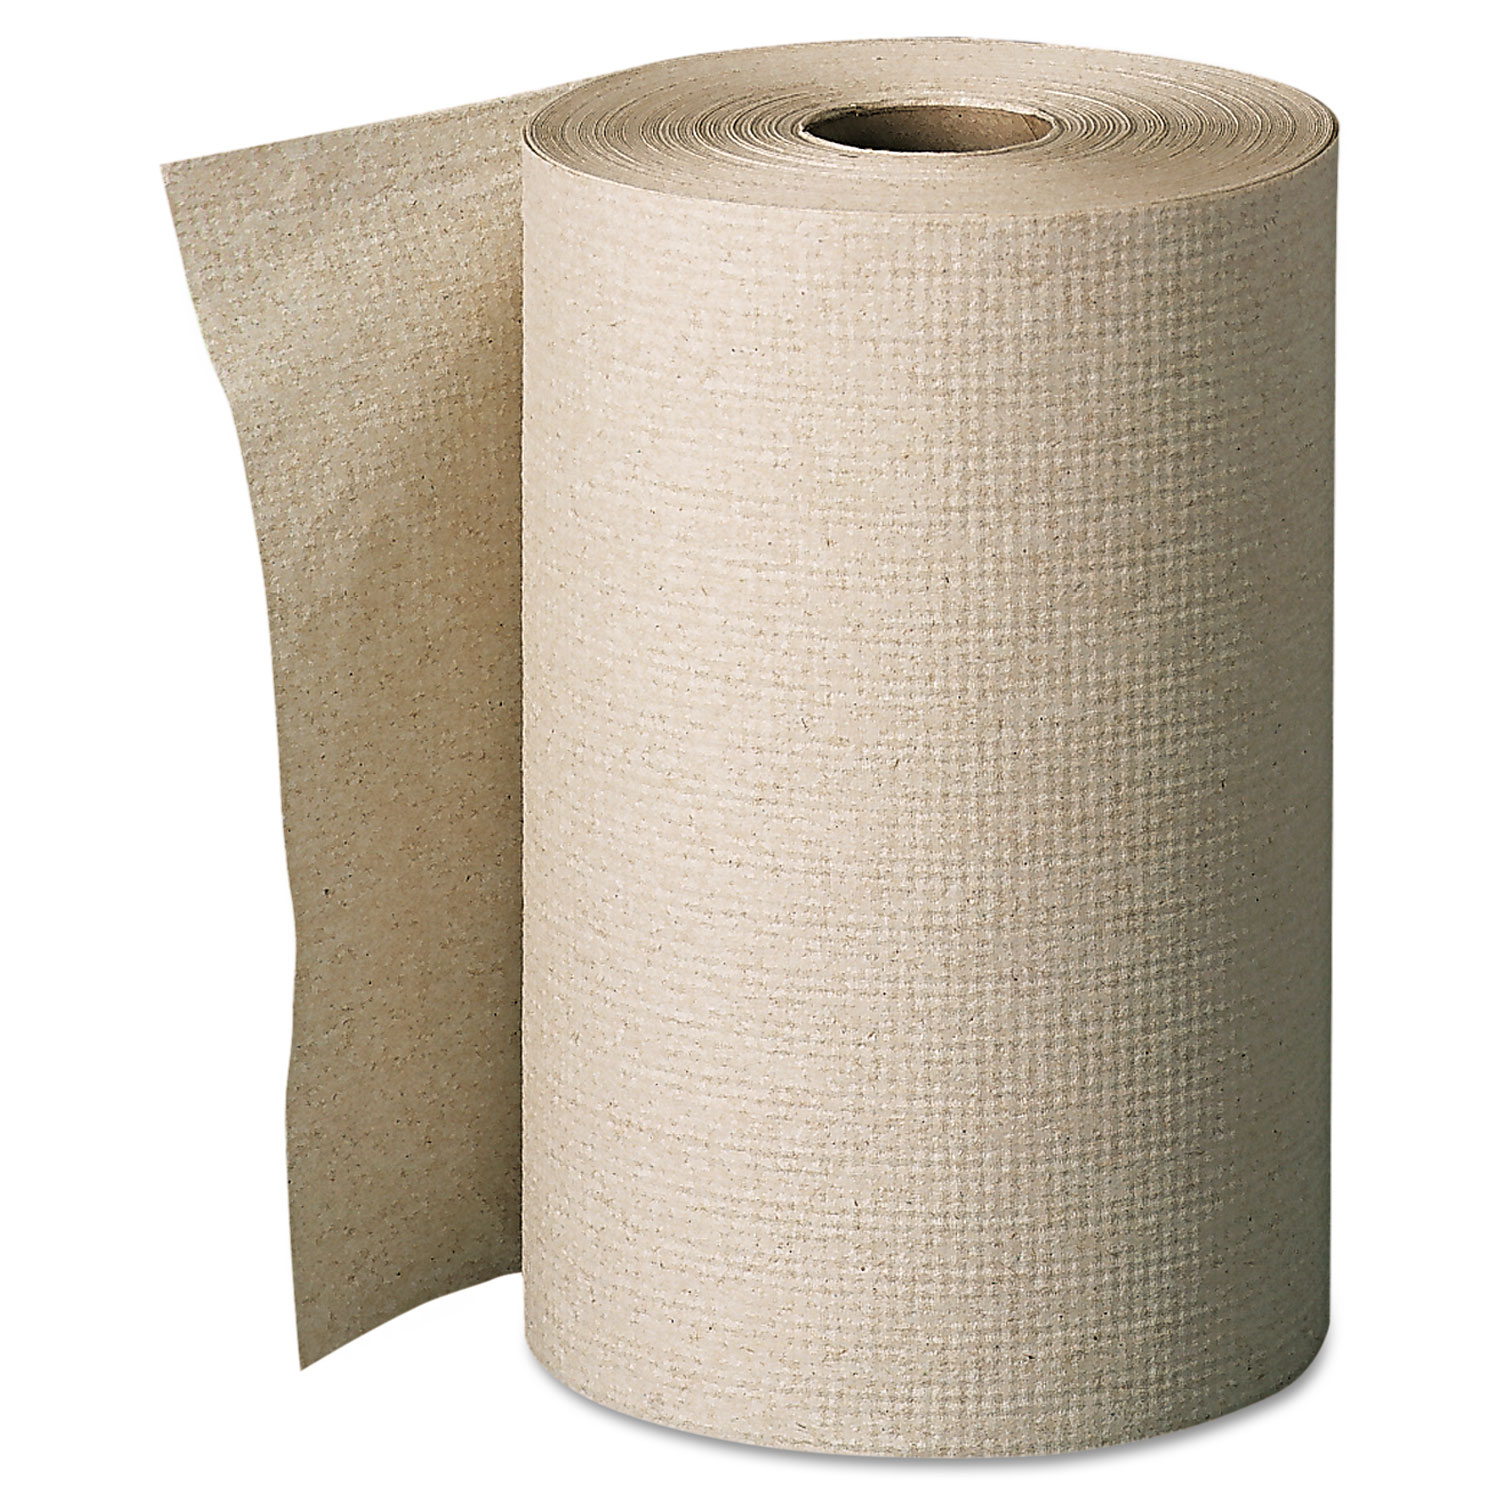 Pacific Blue Basic Nonperforated Paper Towel Rolls, 1-Ply, 7.88 x 800 ft,  White, 6 Rolls/Carton